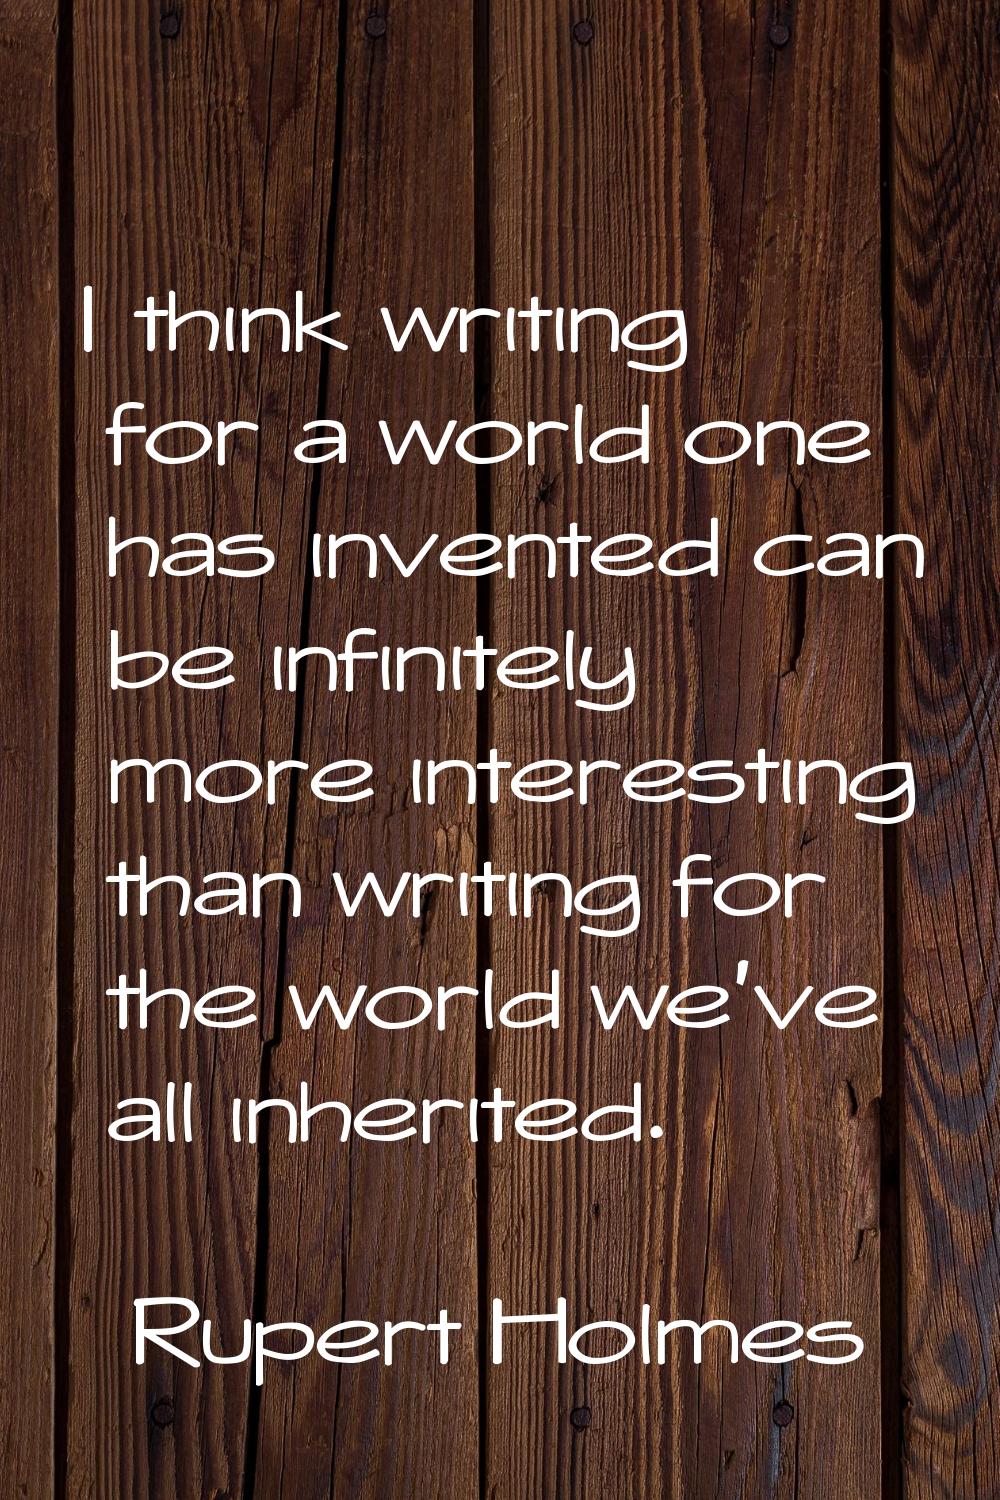 I think writing for a world one has invented can be infinitely more interesting than writing for th